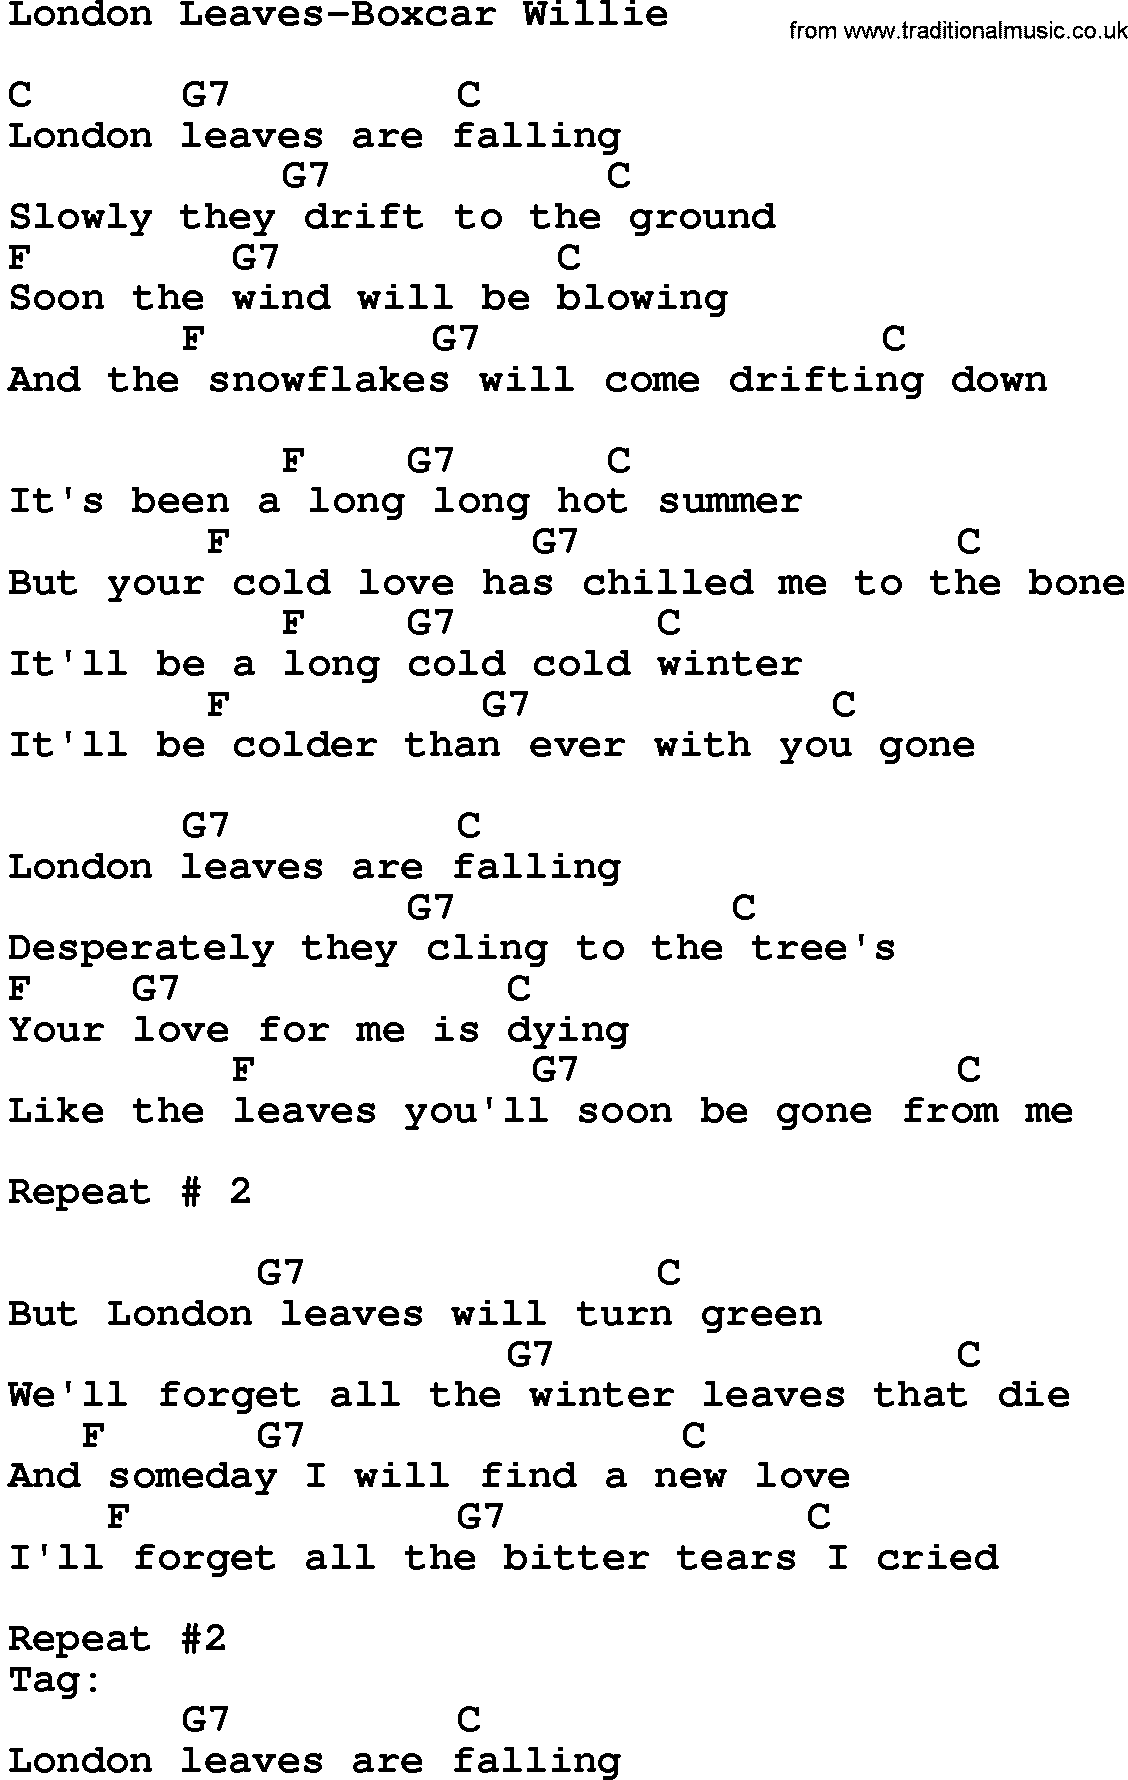 Country music song: London Leaves-Boxcar Willie lyrics and chords